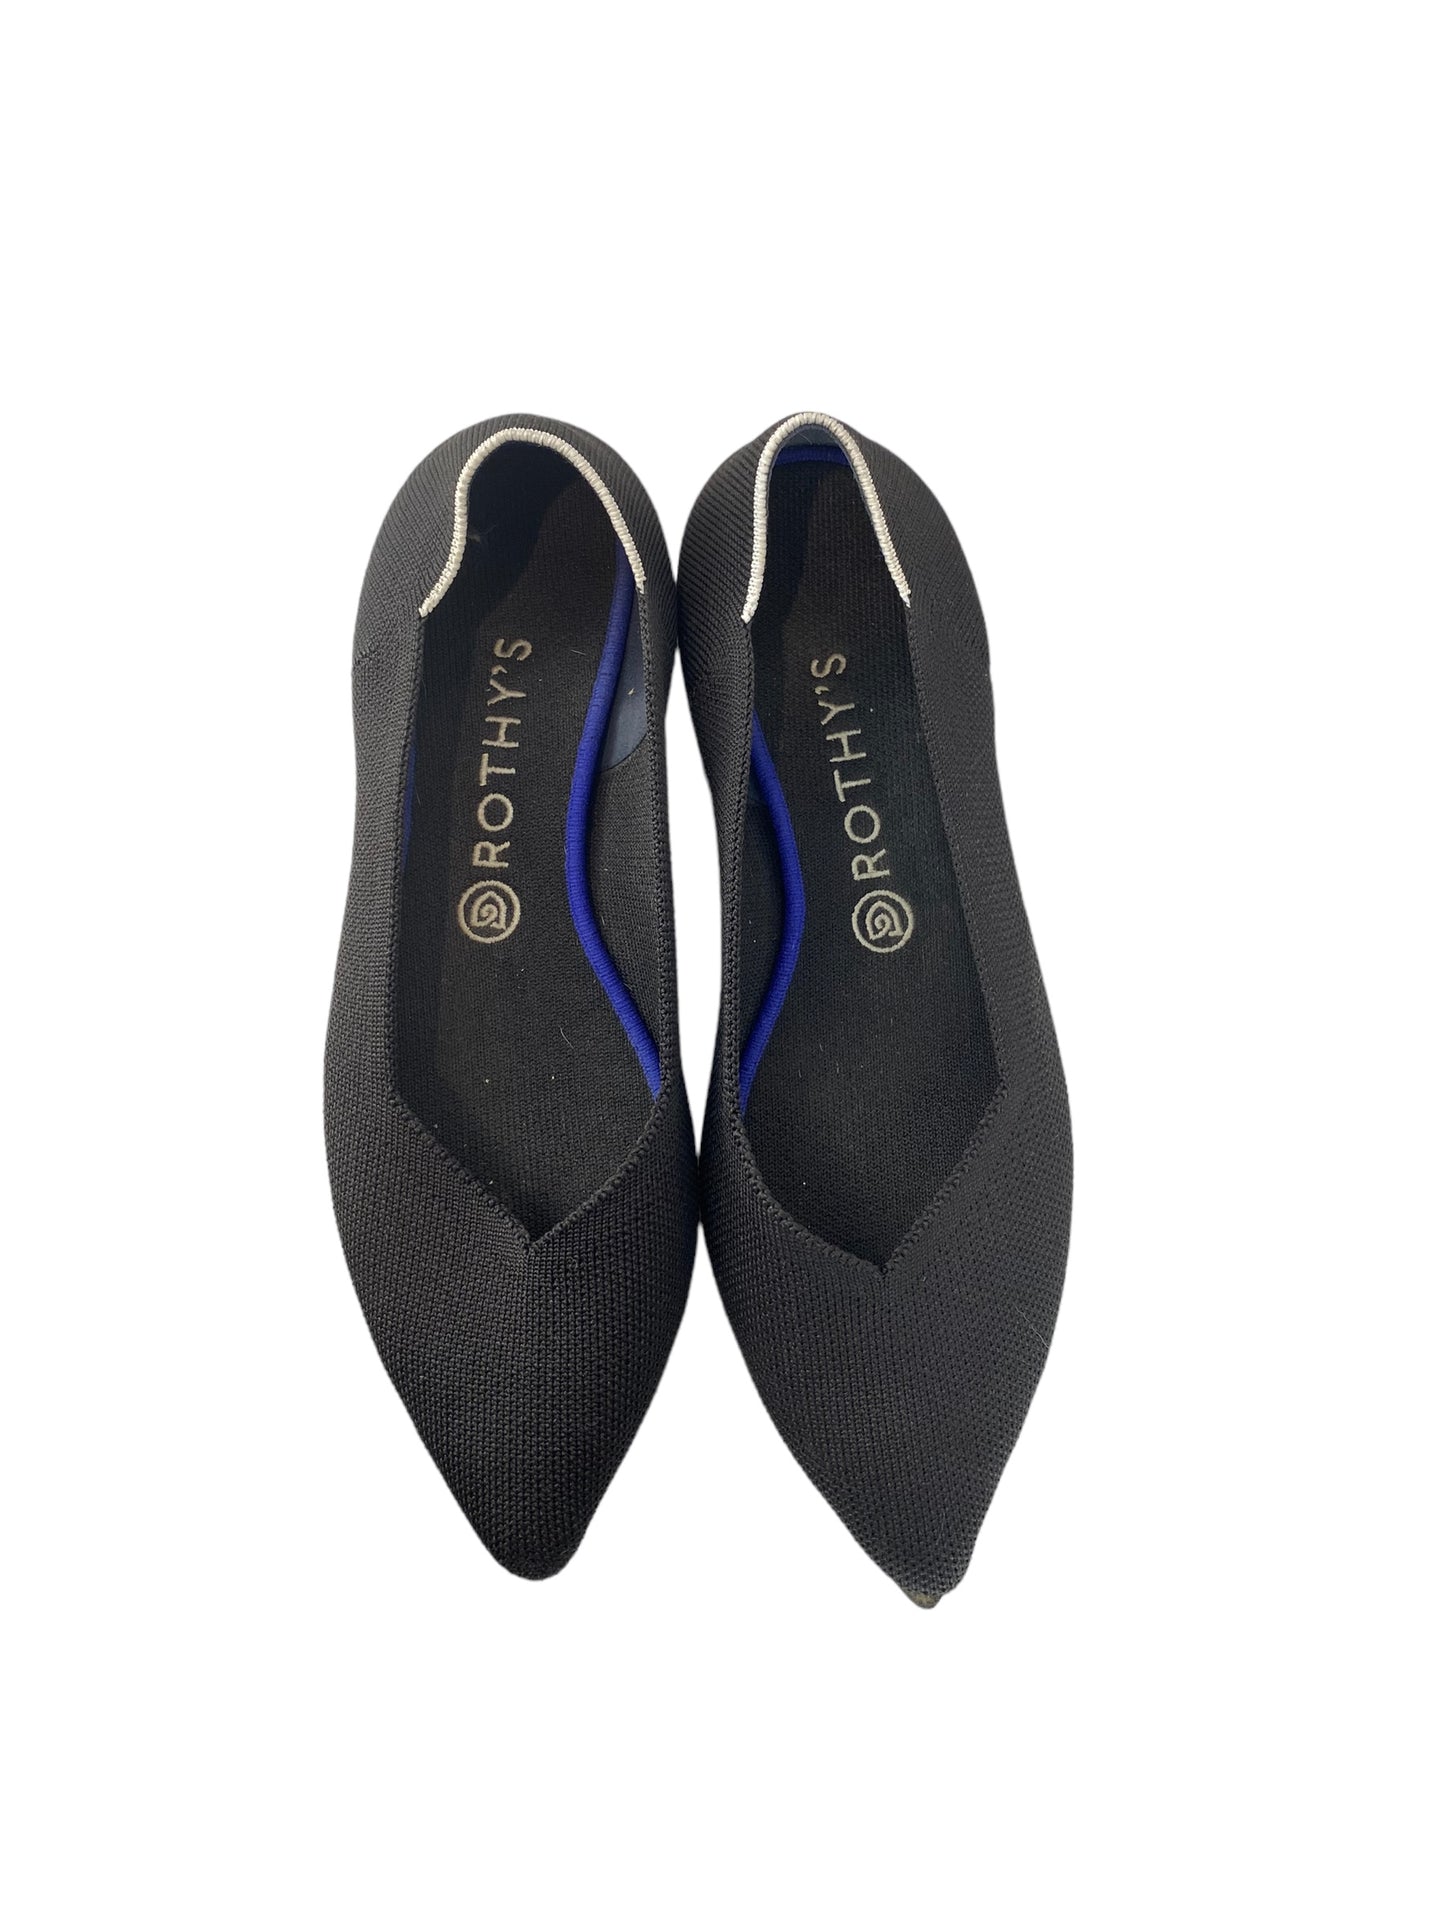 Shoes Flats By Rothys  Size: 10.5